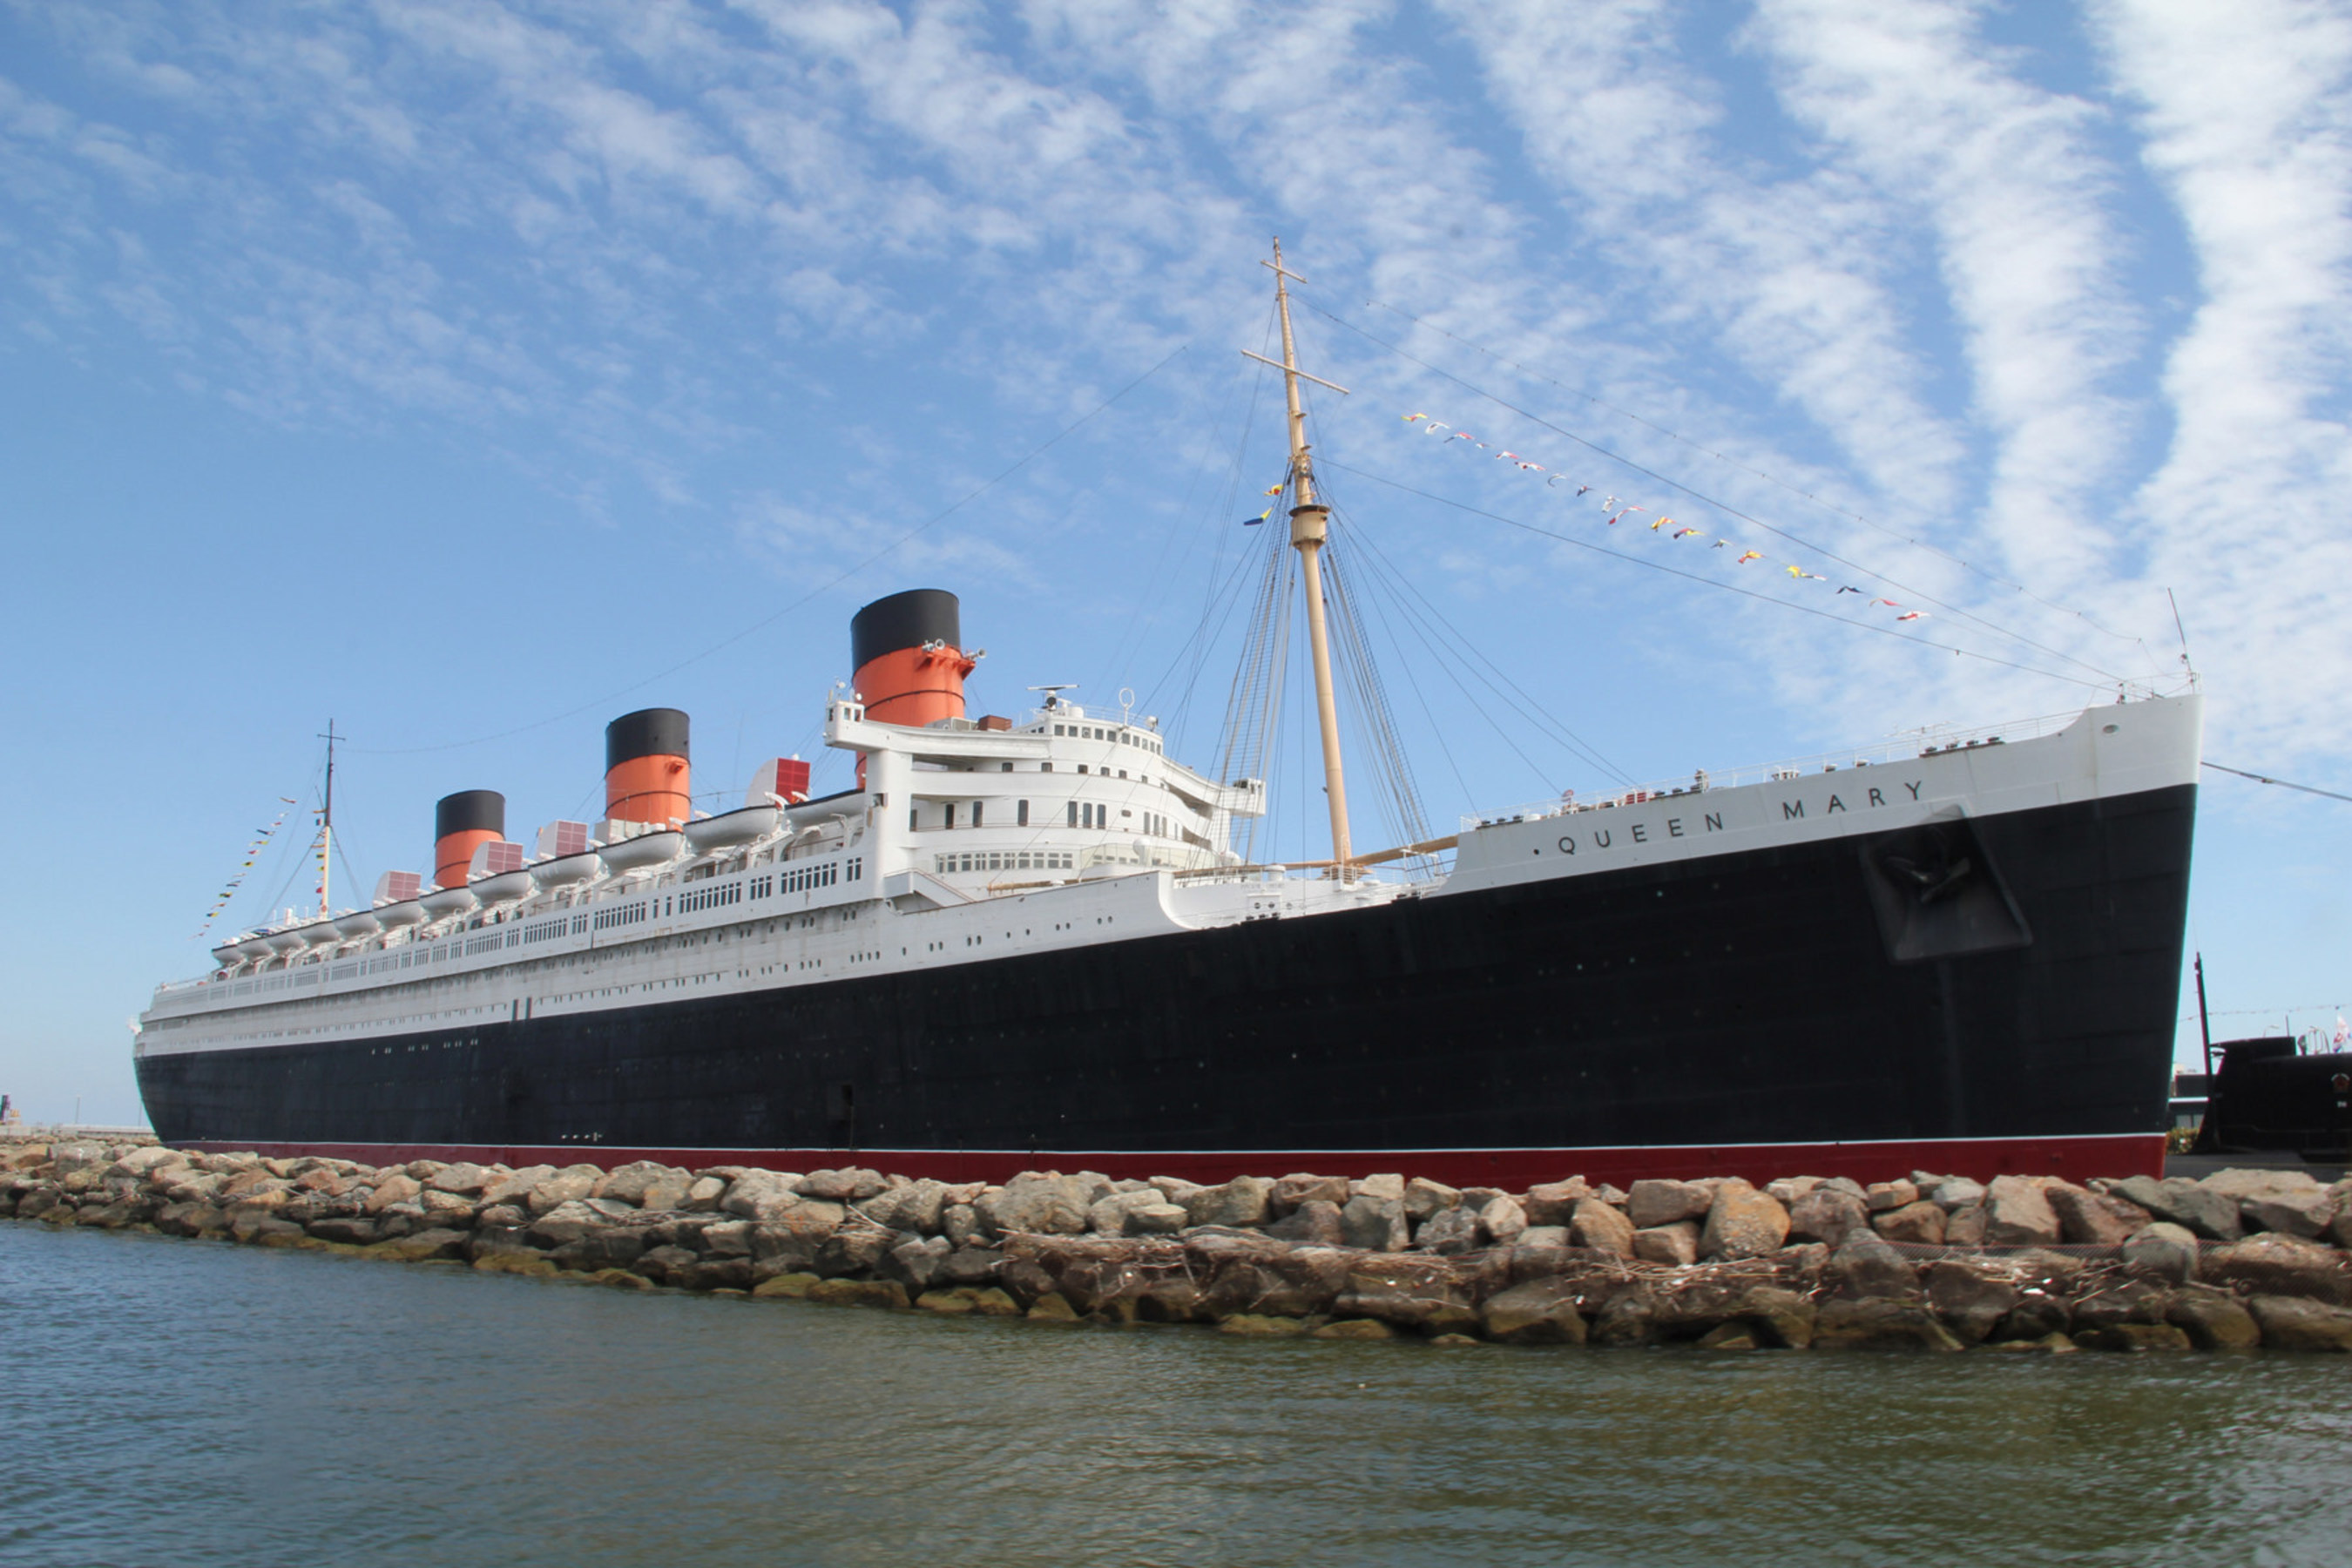 The Queen Mary In New York: An Historic Maritime Vision ...
